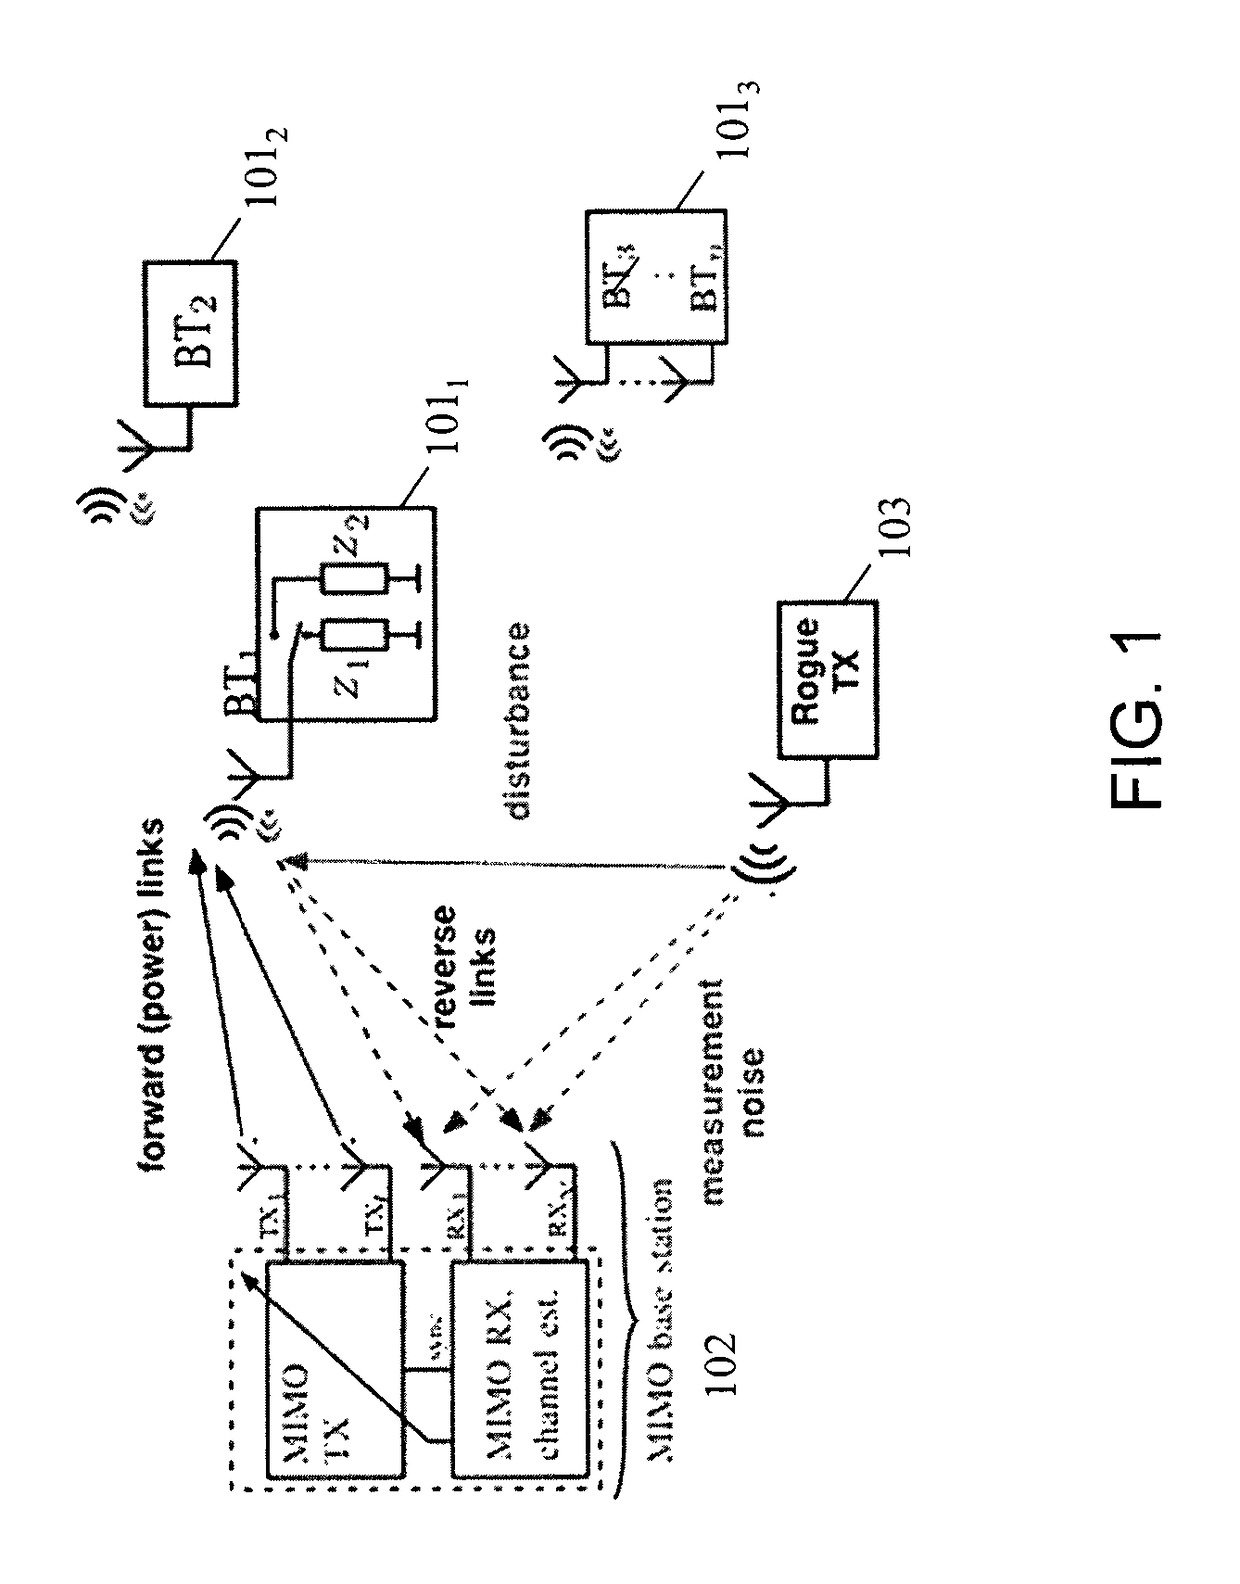 Real-time wireless power transfer control for passive backscattering devices